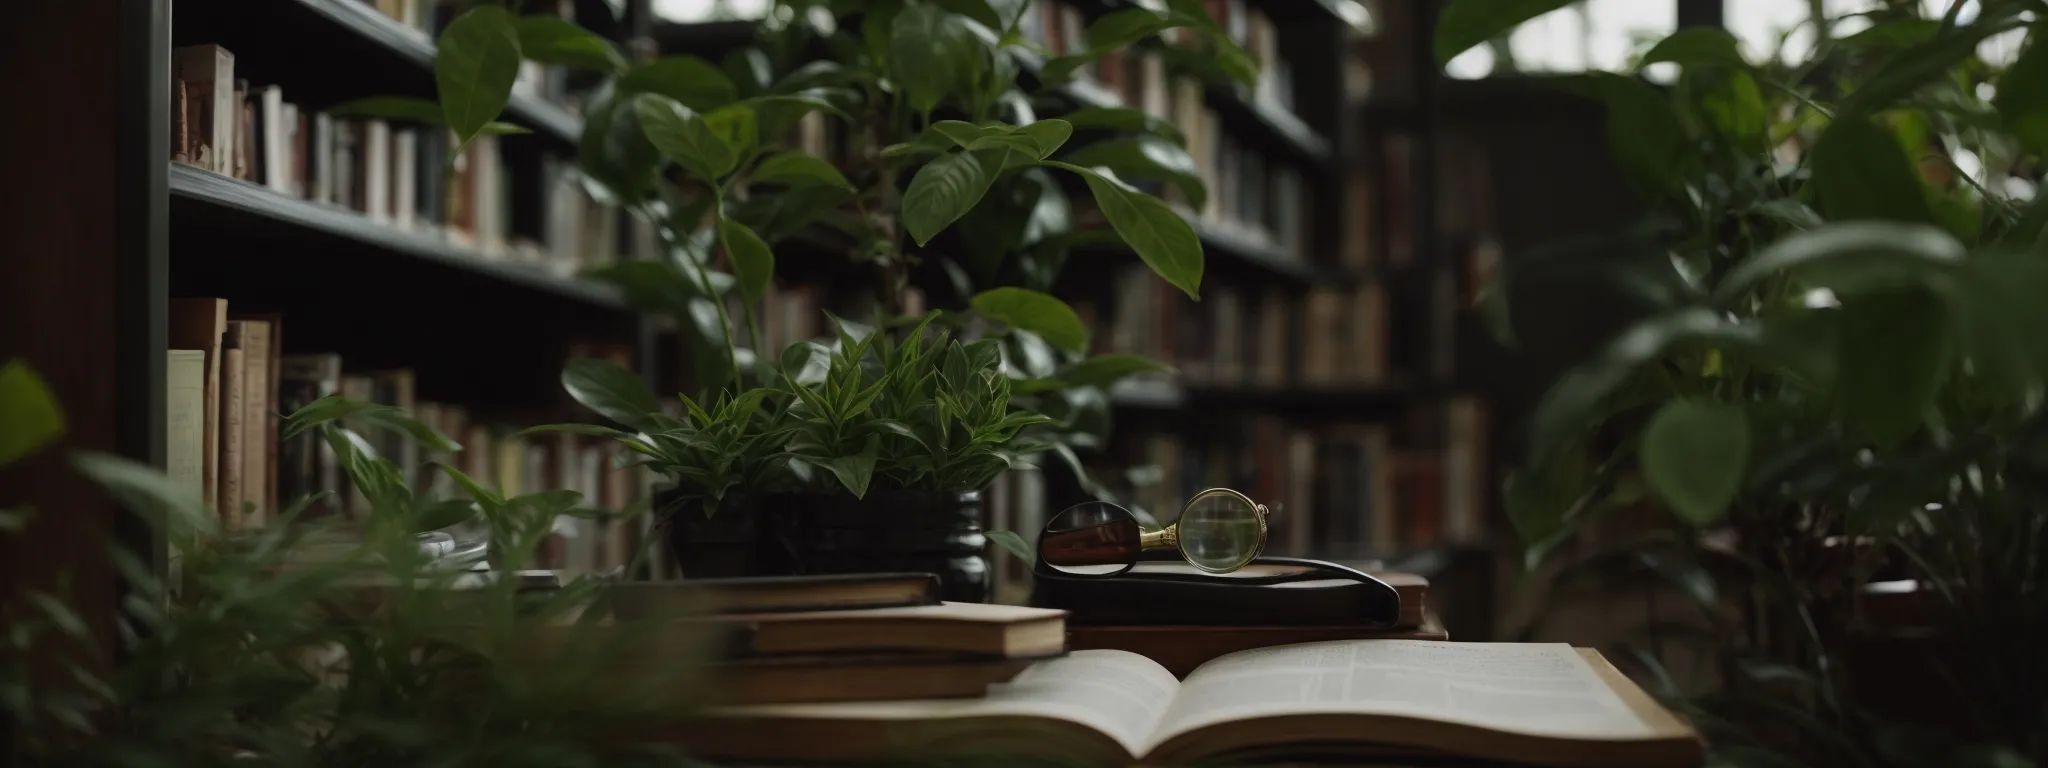 a library with an open book and magnifying glass on a table, surrounded by plants.